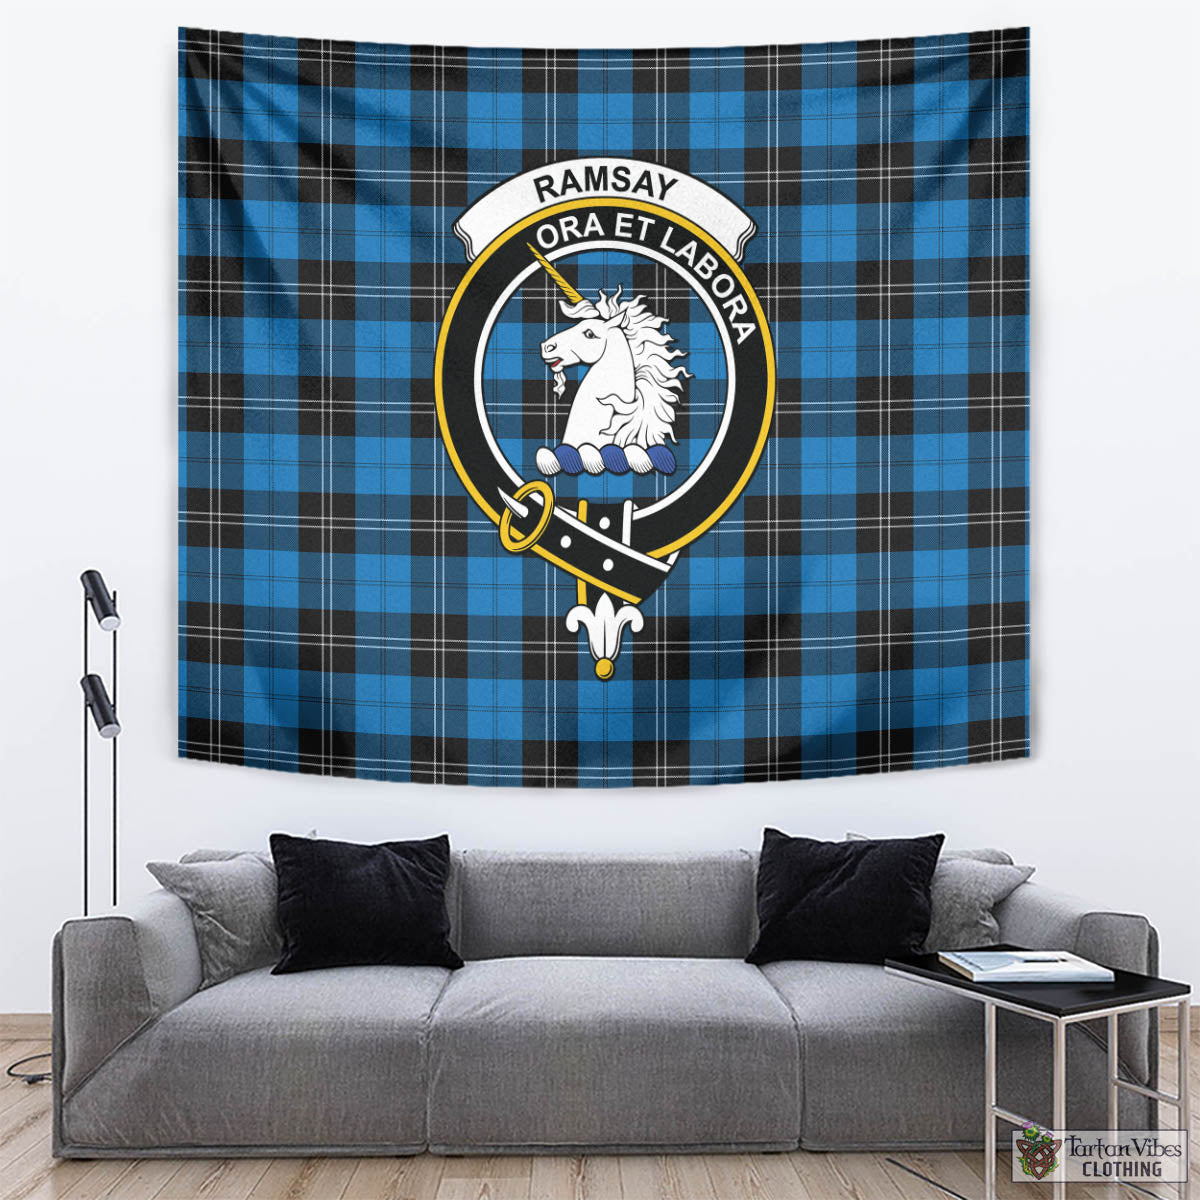 Tartan Vibes Clothing Ramsay Blue Ancient Tartan Tapestry Wall Hanging and Home Decor for Room with Family Crest